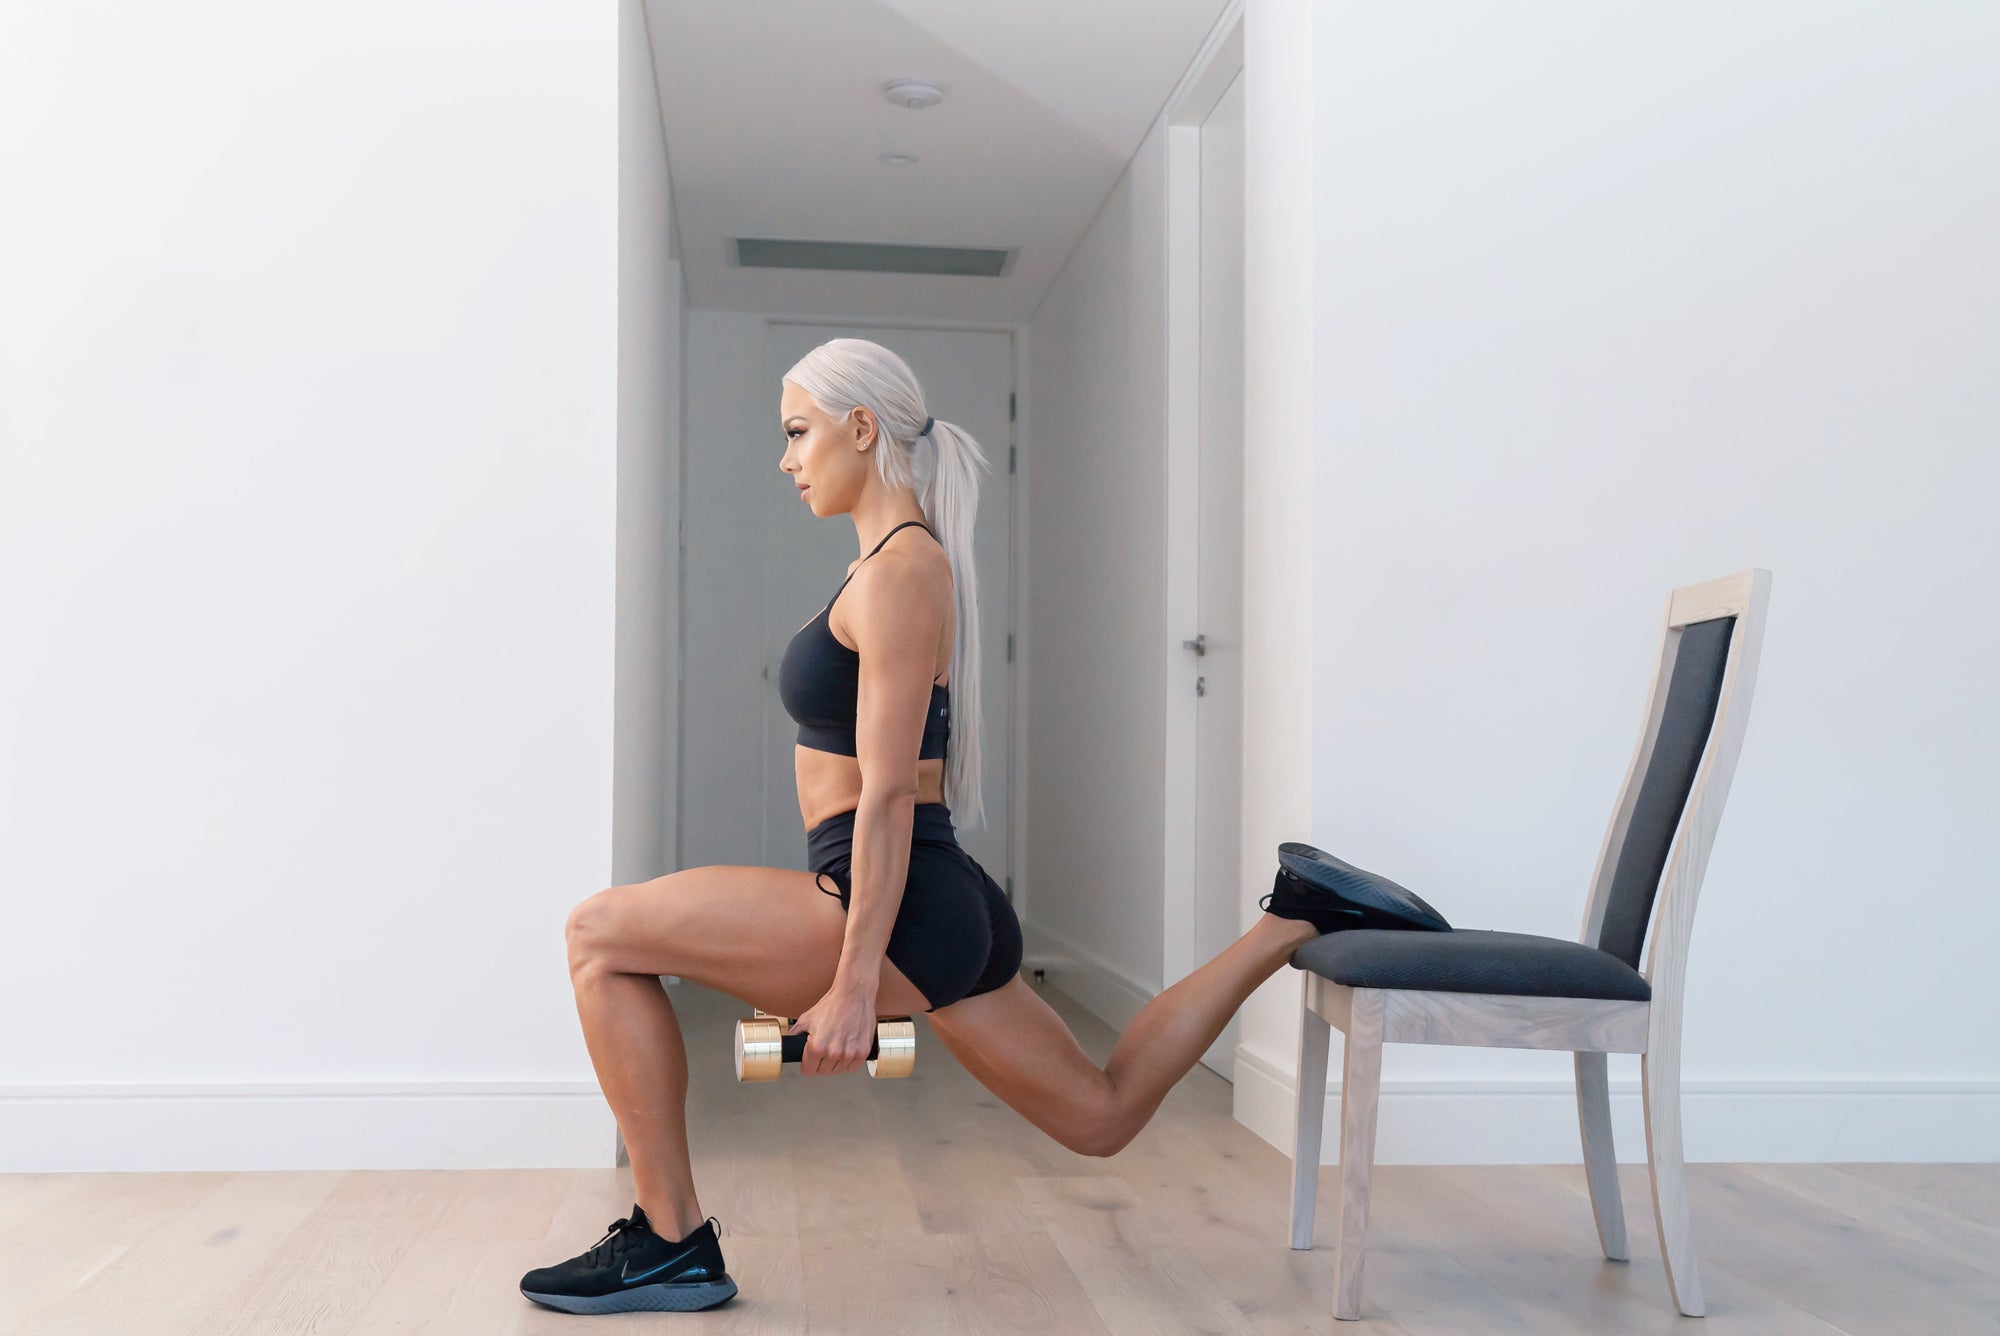 What Equipment Do I Need To Get Results From Home?-Lauren Simpson Fitness